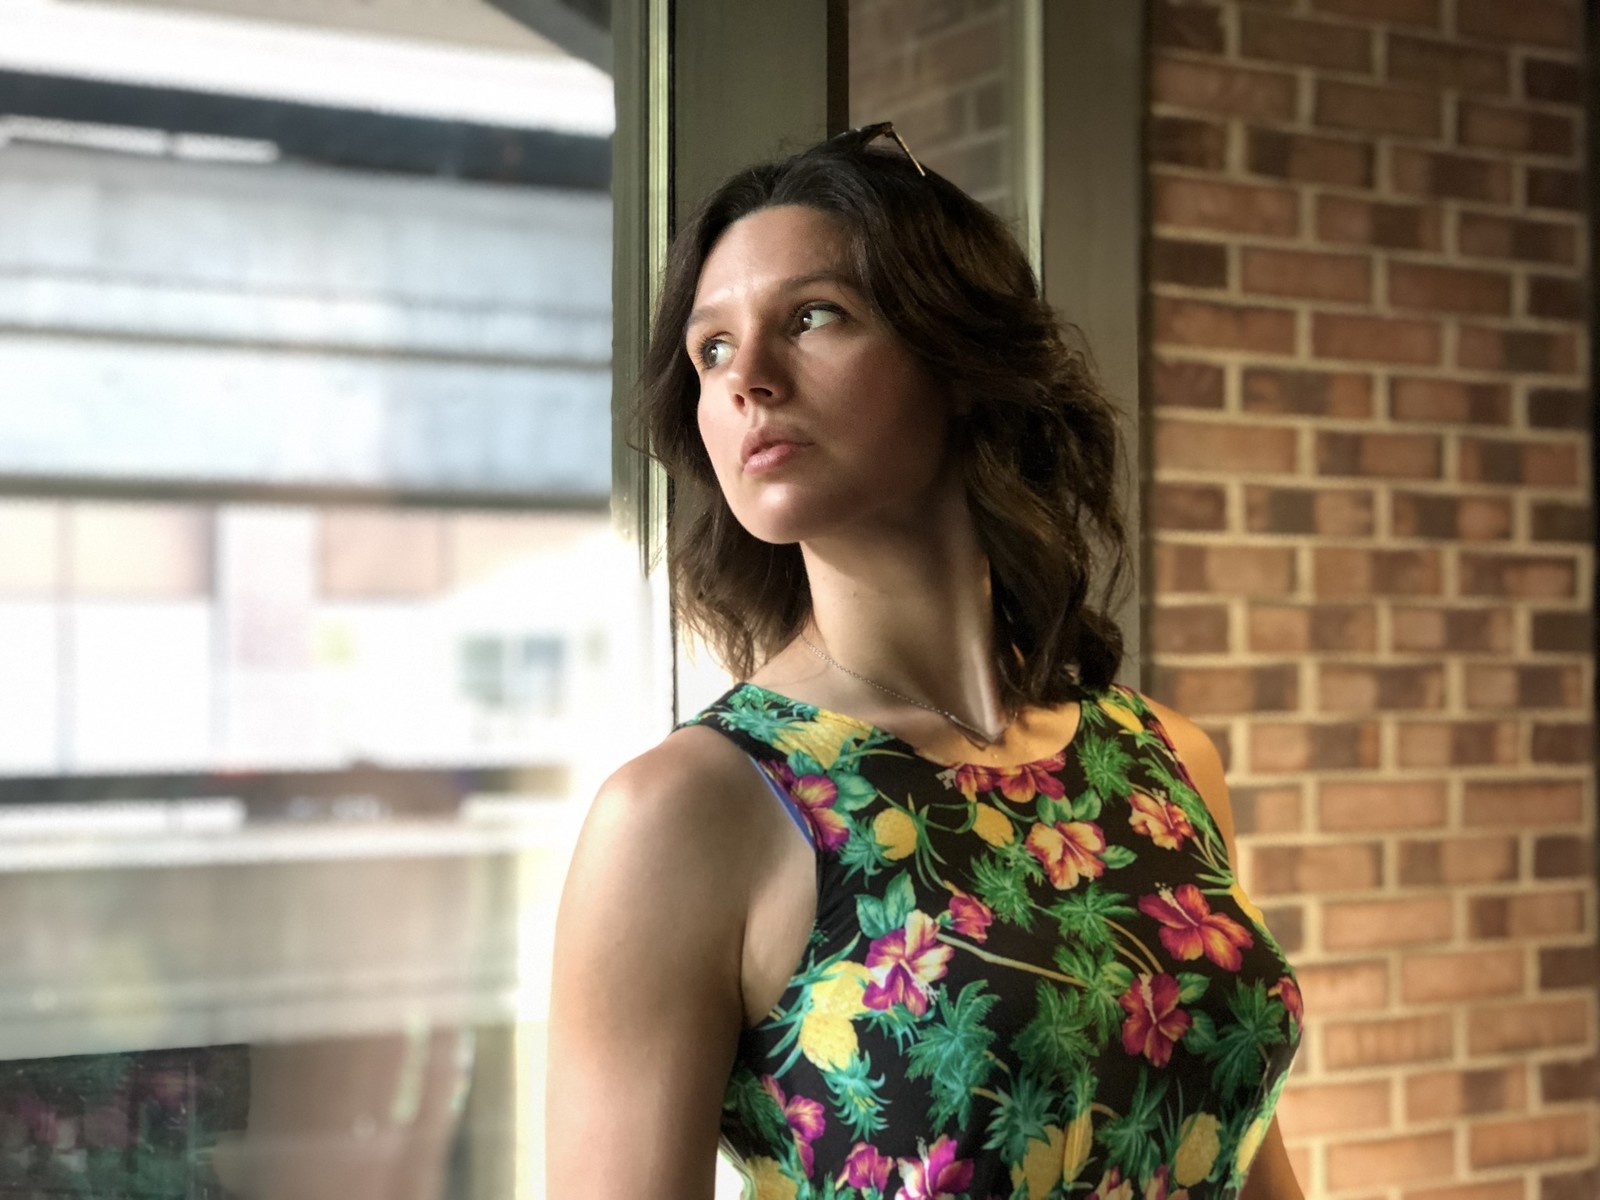 How to use Portrait mode and Portrait Lighting on iPhone X | iMore